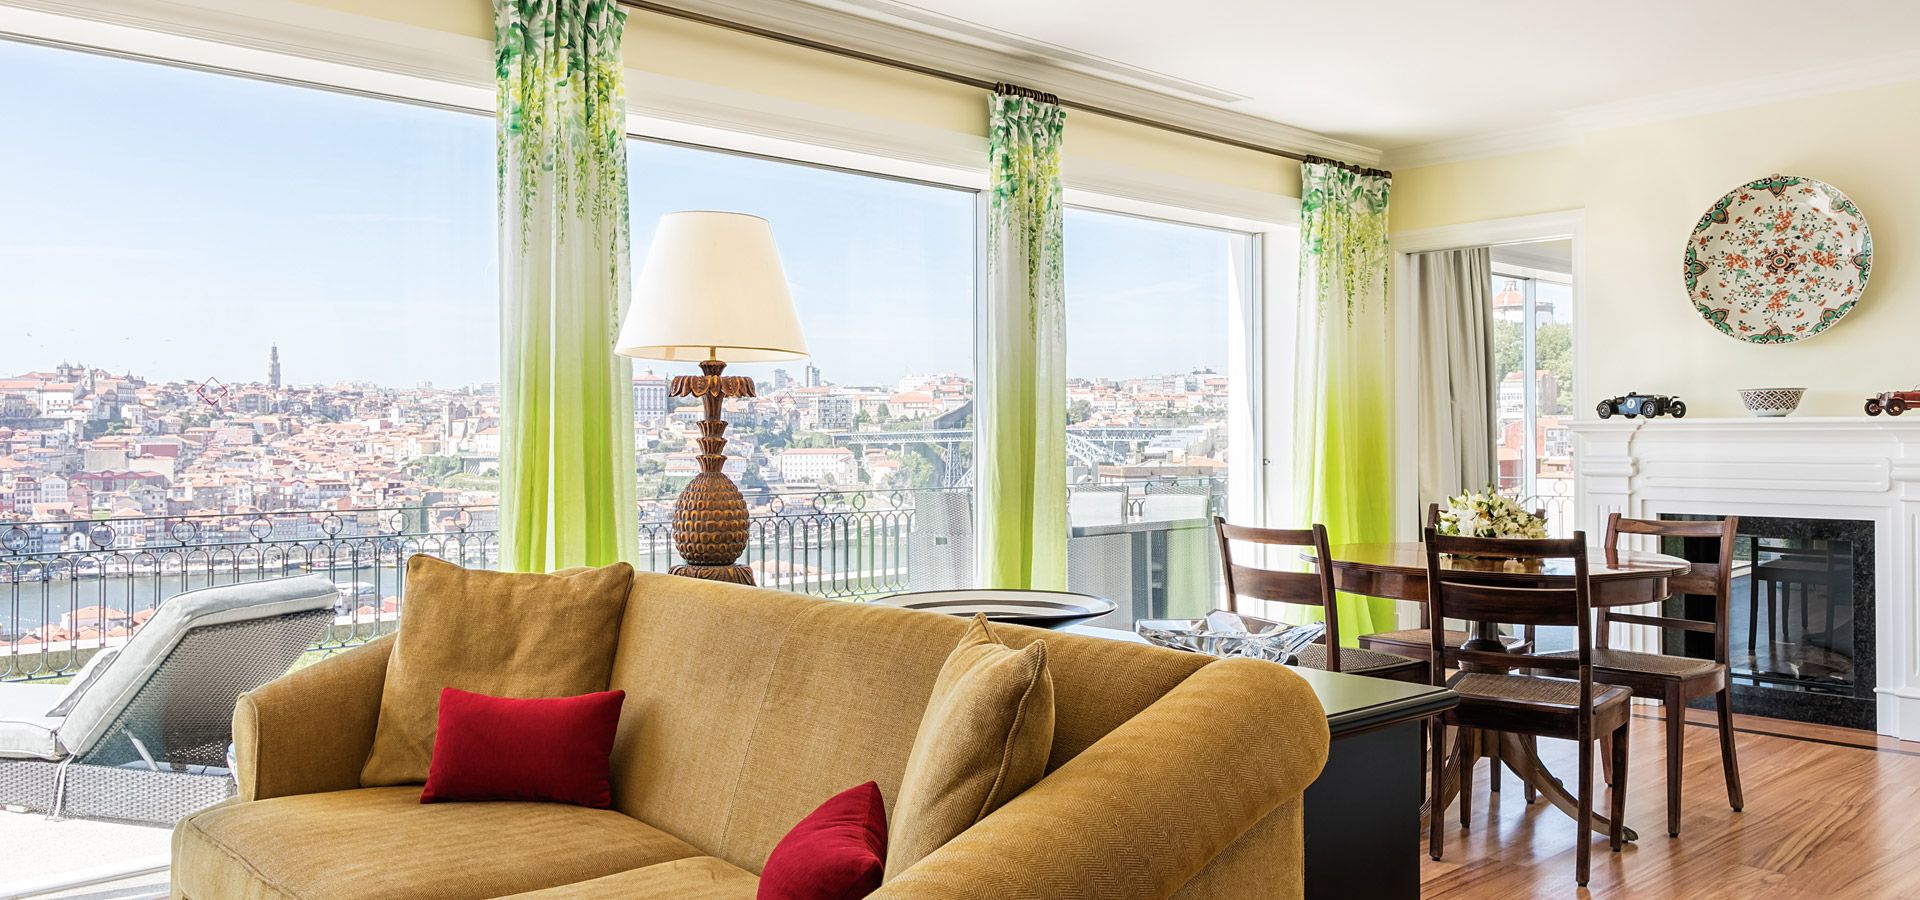 The Artists Suite at The Yeatman, Porto